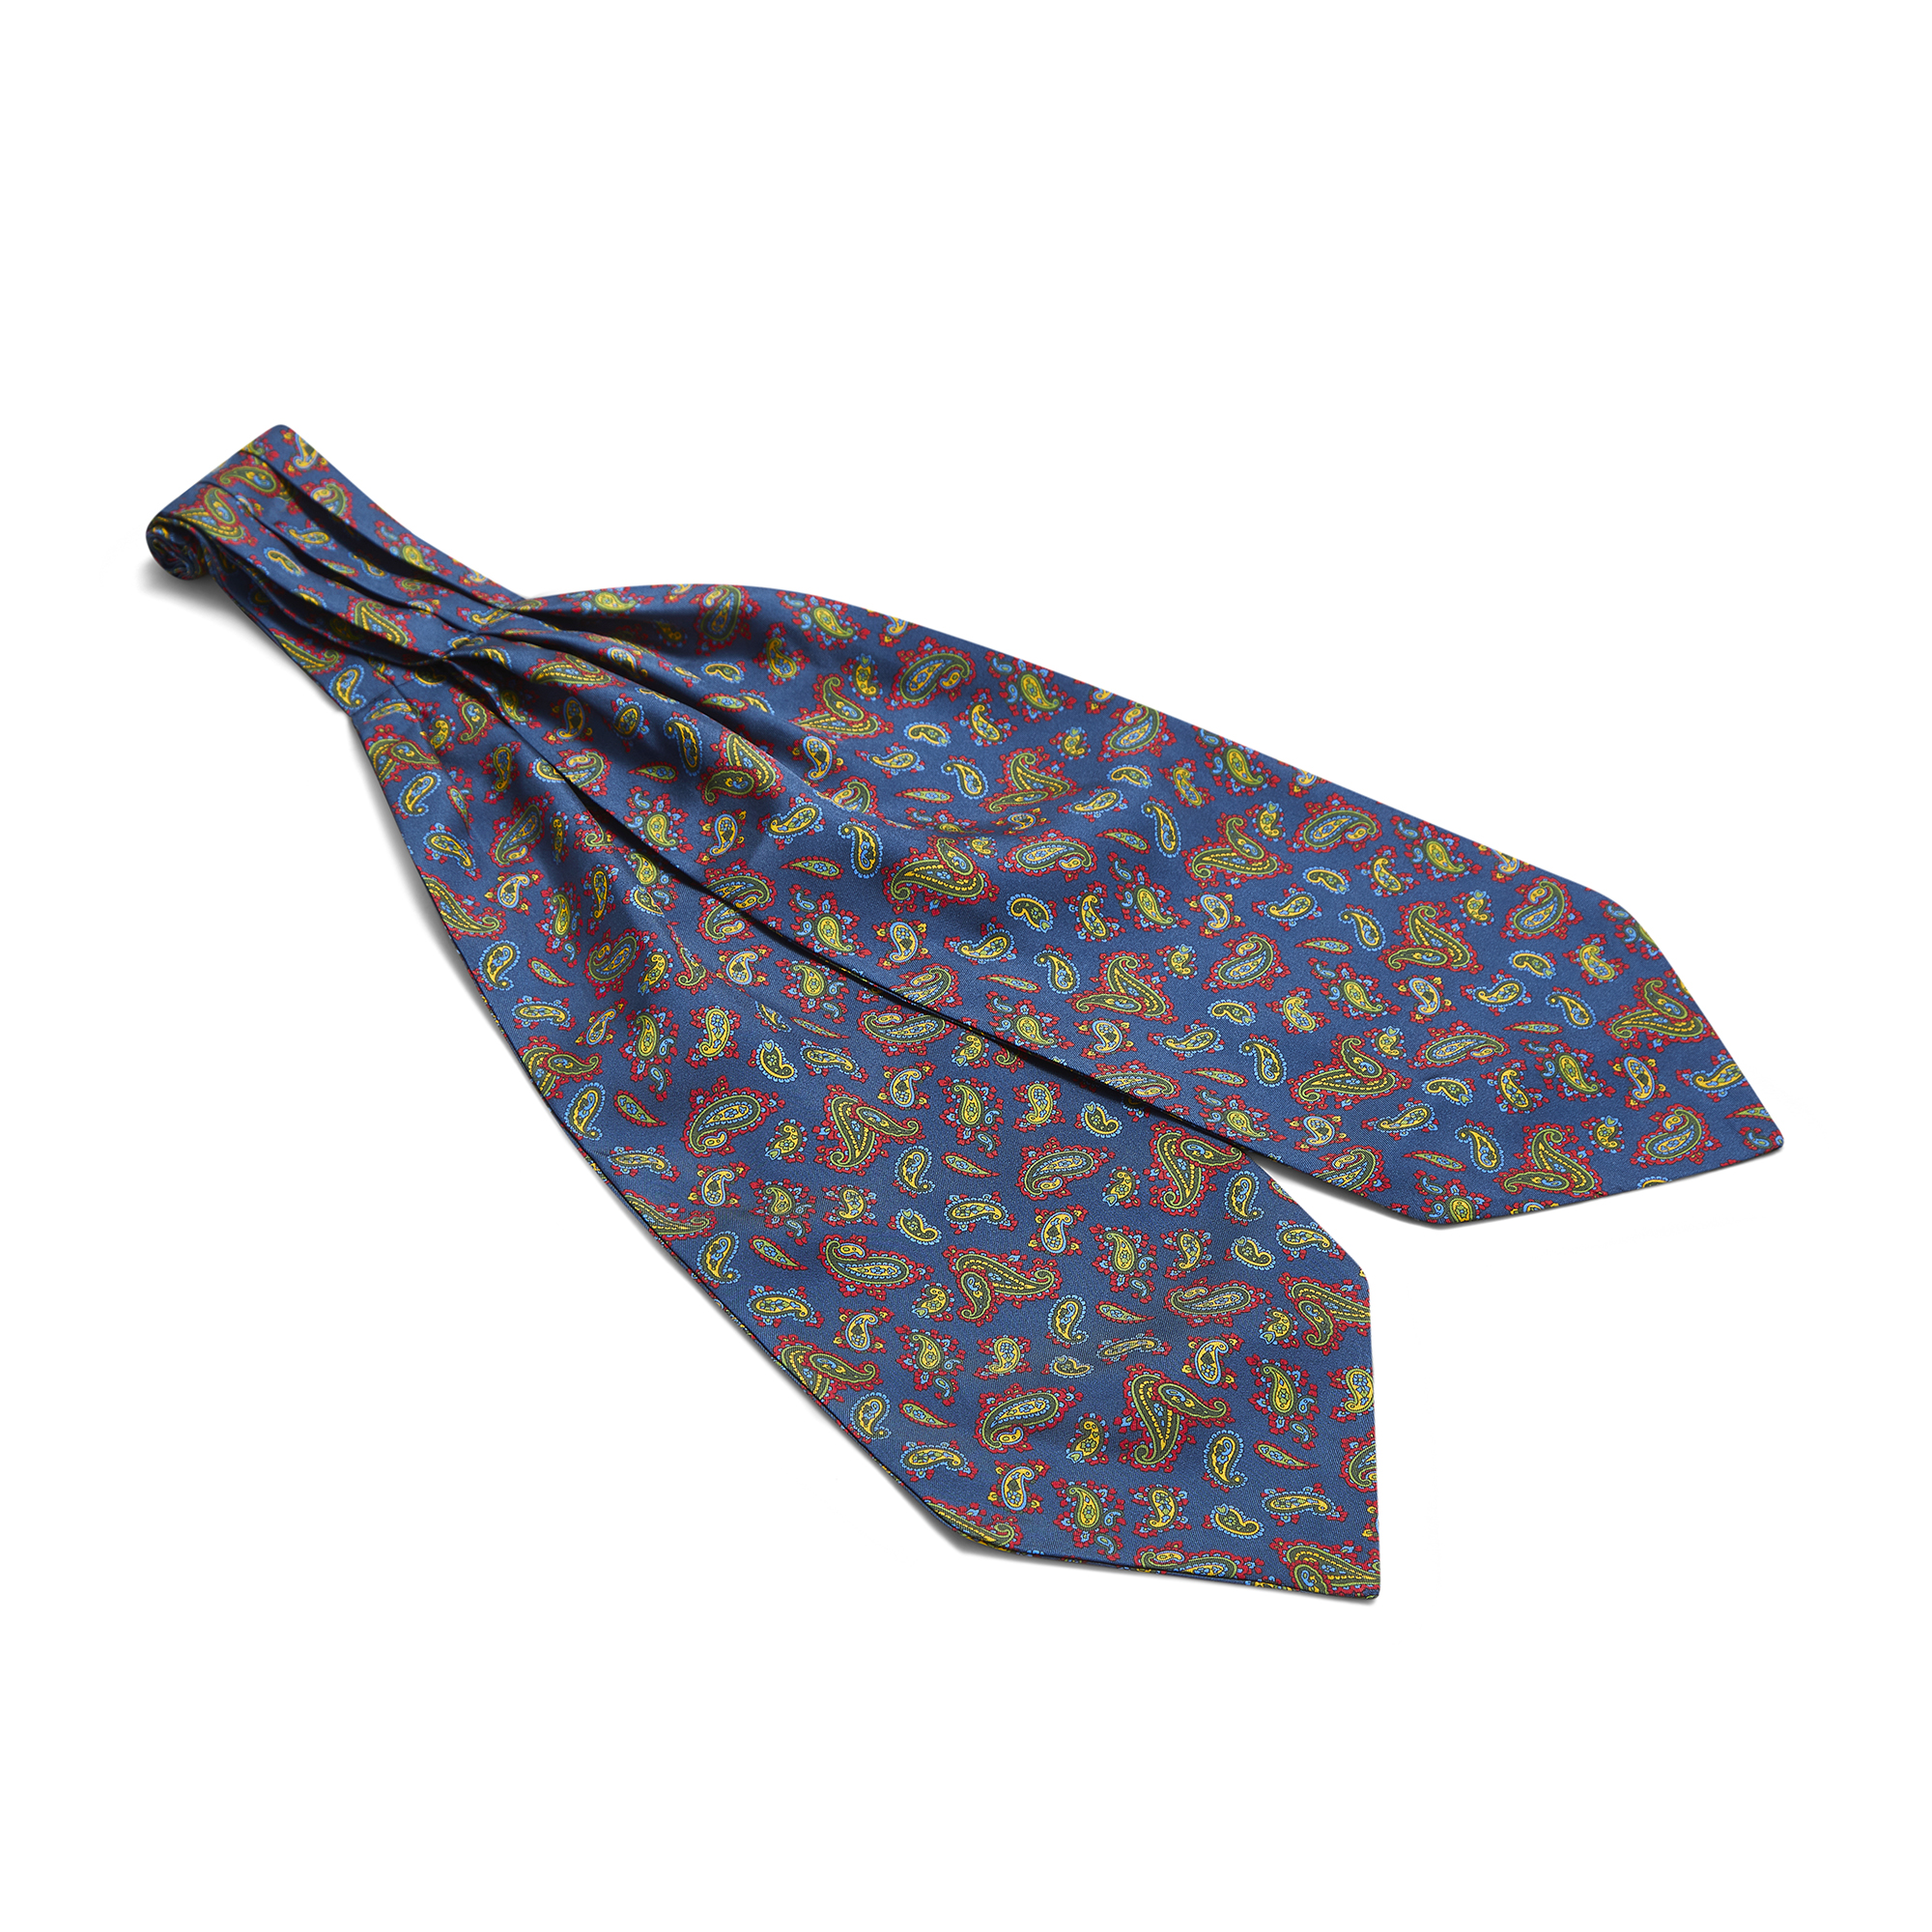 Silk Cravat, Navy Blue With Green, Yellow & Red Paisley Design